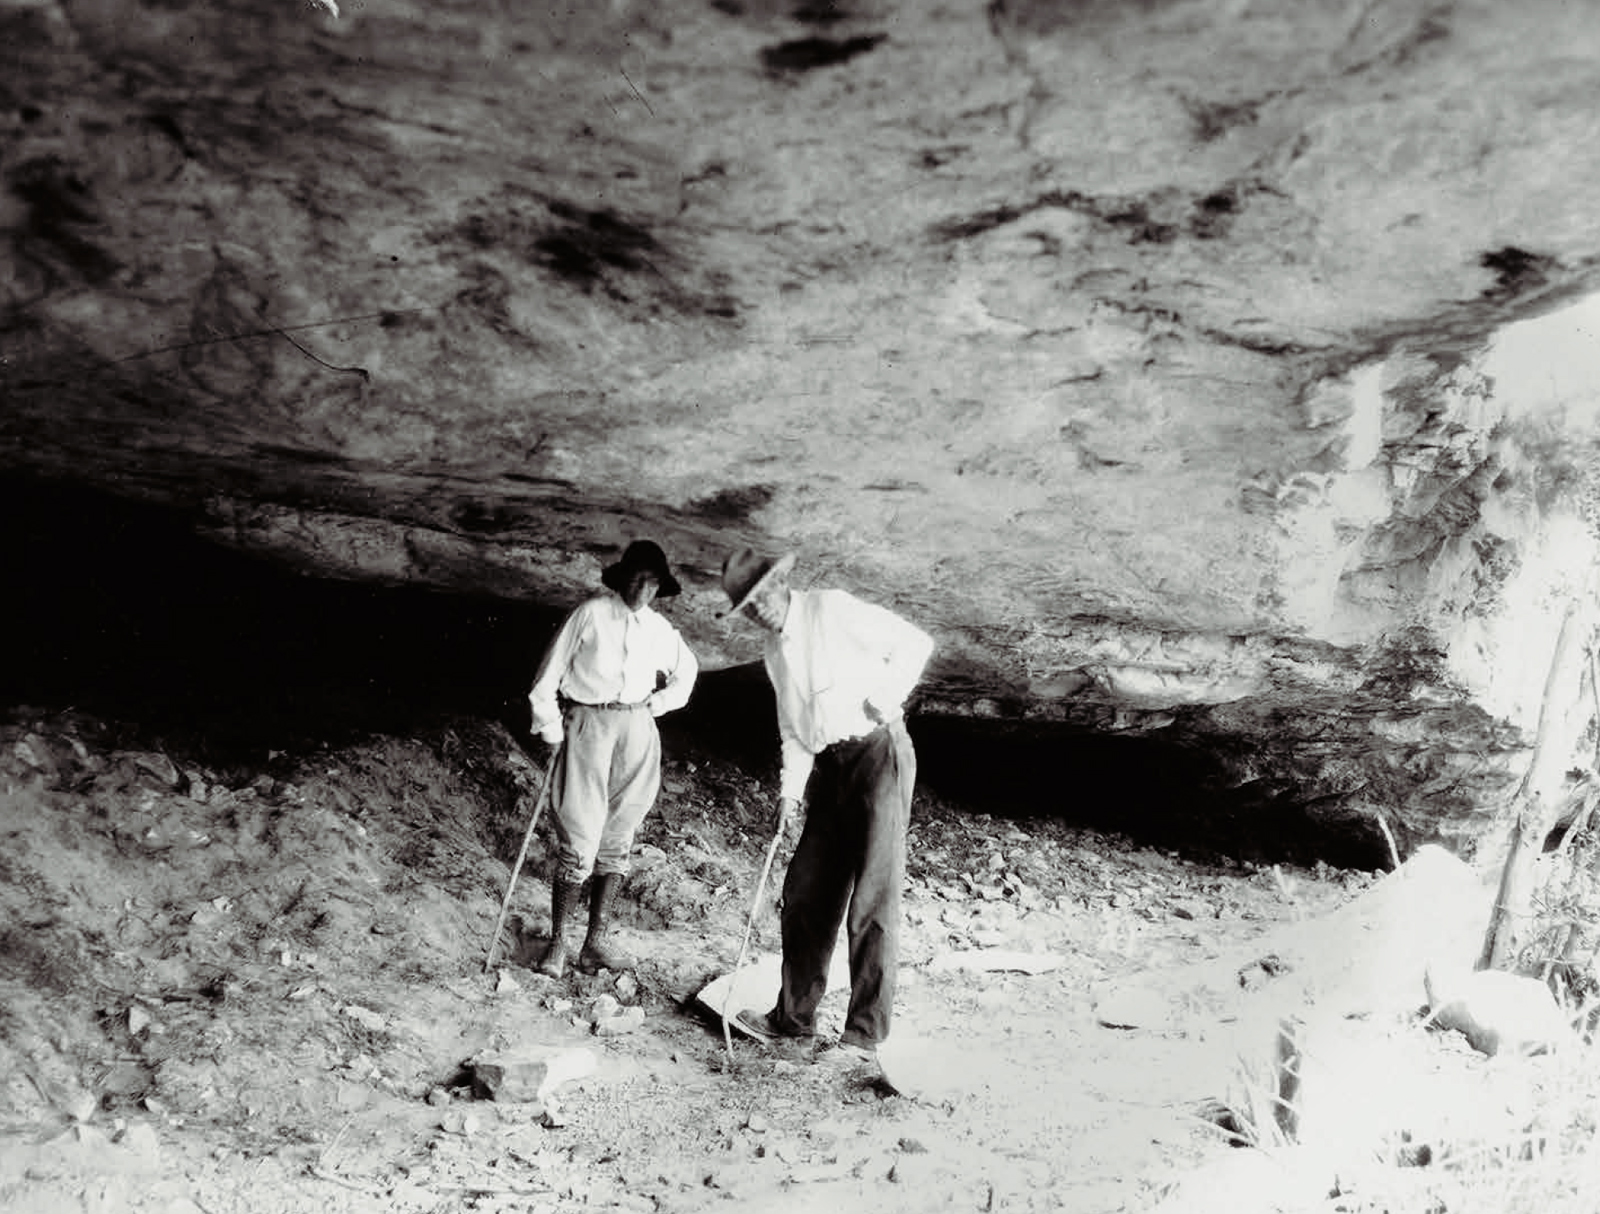 Virigina Carson was a member of the Witte expedition led by Emma Gutzeit (pictured here). These pioneering women of the 1930s were the first to document the rock art of the Lower Pecos